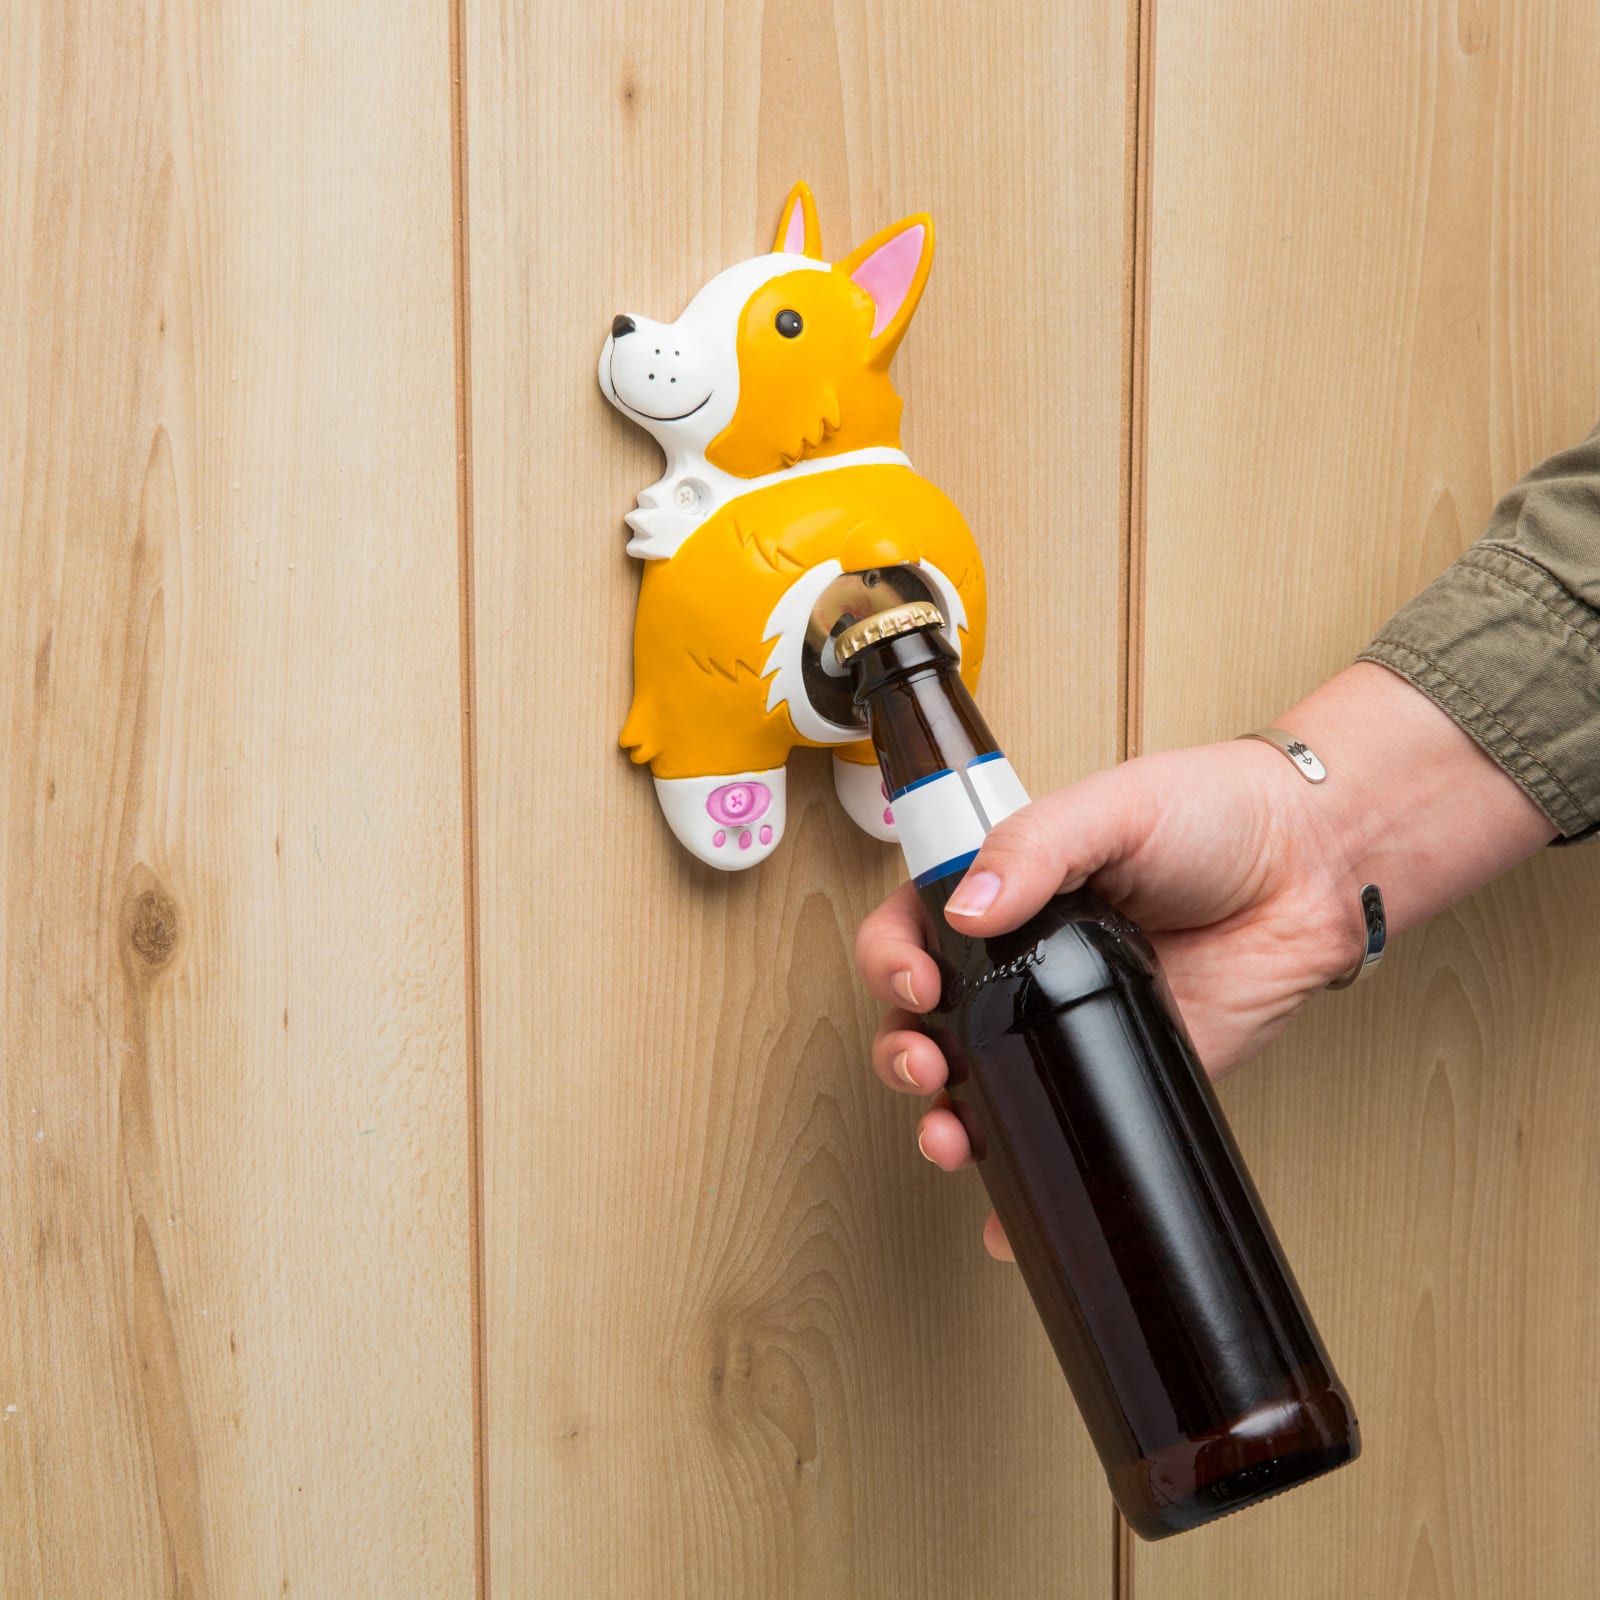 This Corgi Butt Bottle Opener Is Way Too Cute, Don't You Agree?